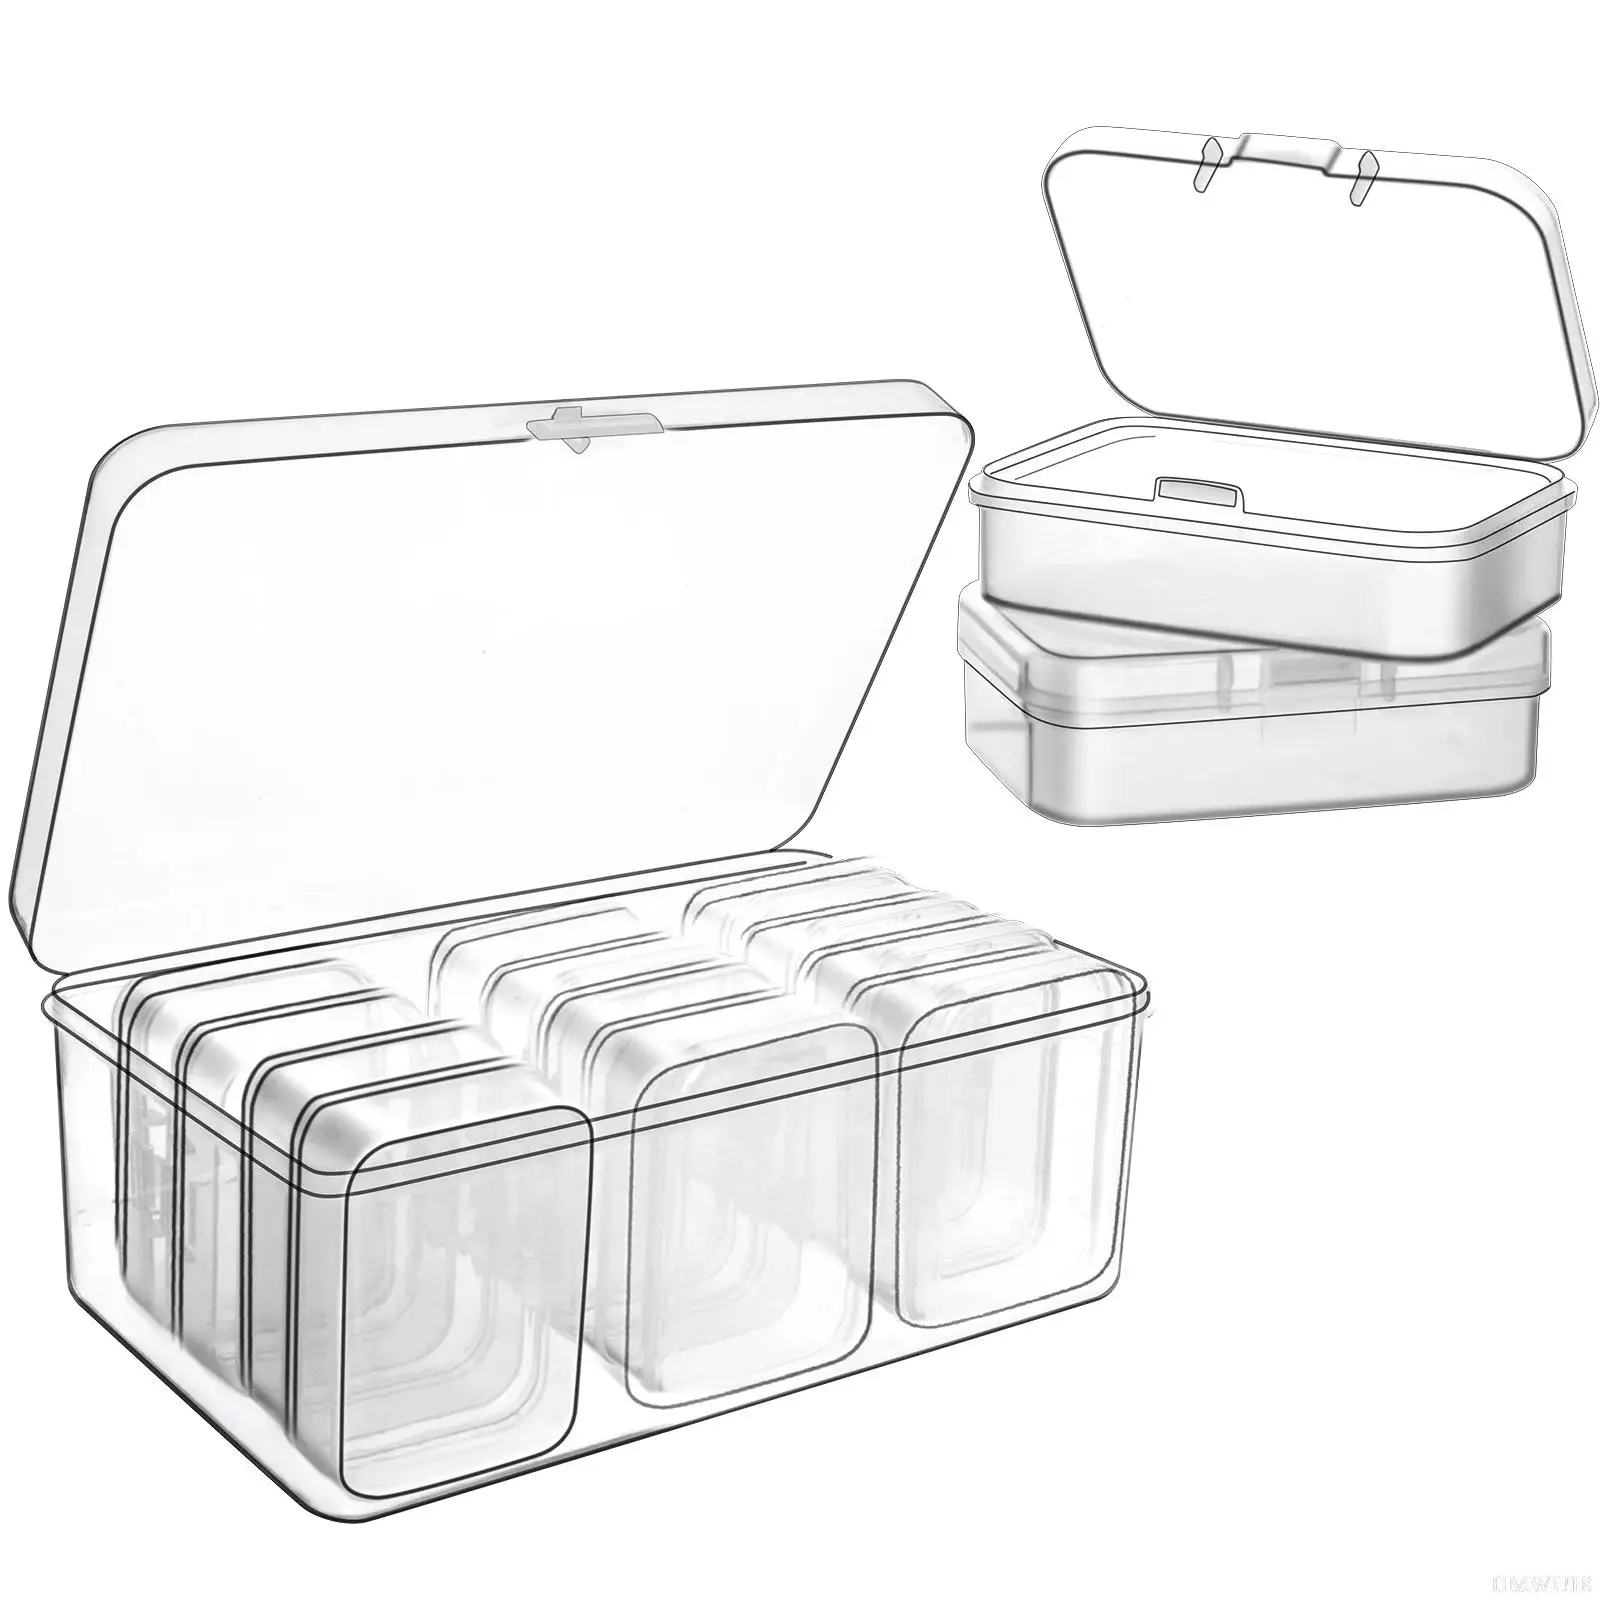 https://ae01.alicdn.com/kf/Sbc7abaa6b1ac4d10ad8e88ec620a777bR/12-Pack-Plastic-Clear-Storage-Box-Organizer-Small-Storage-Case-Containers-Toy-Ring-Jewelry-Organizer-Makeup.jpg